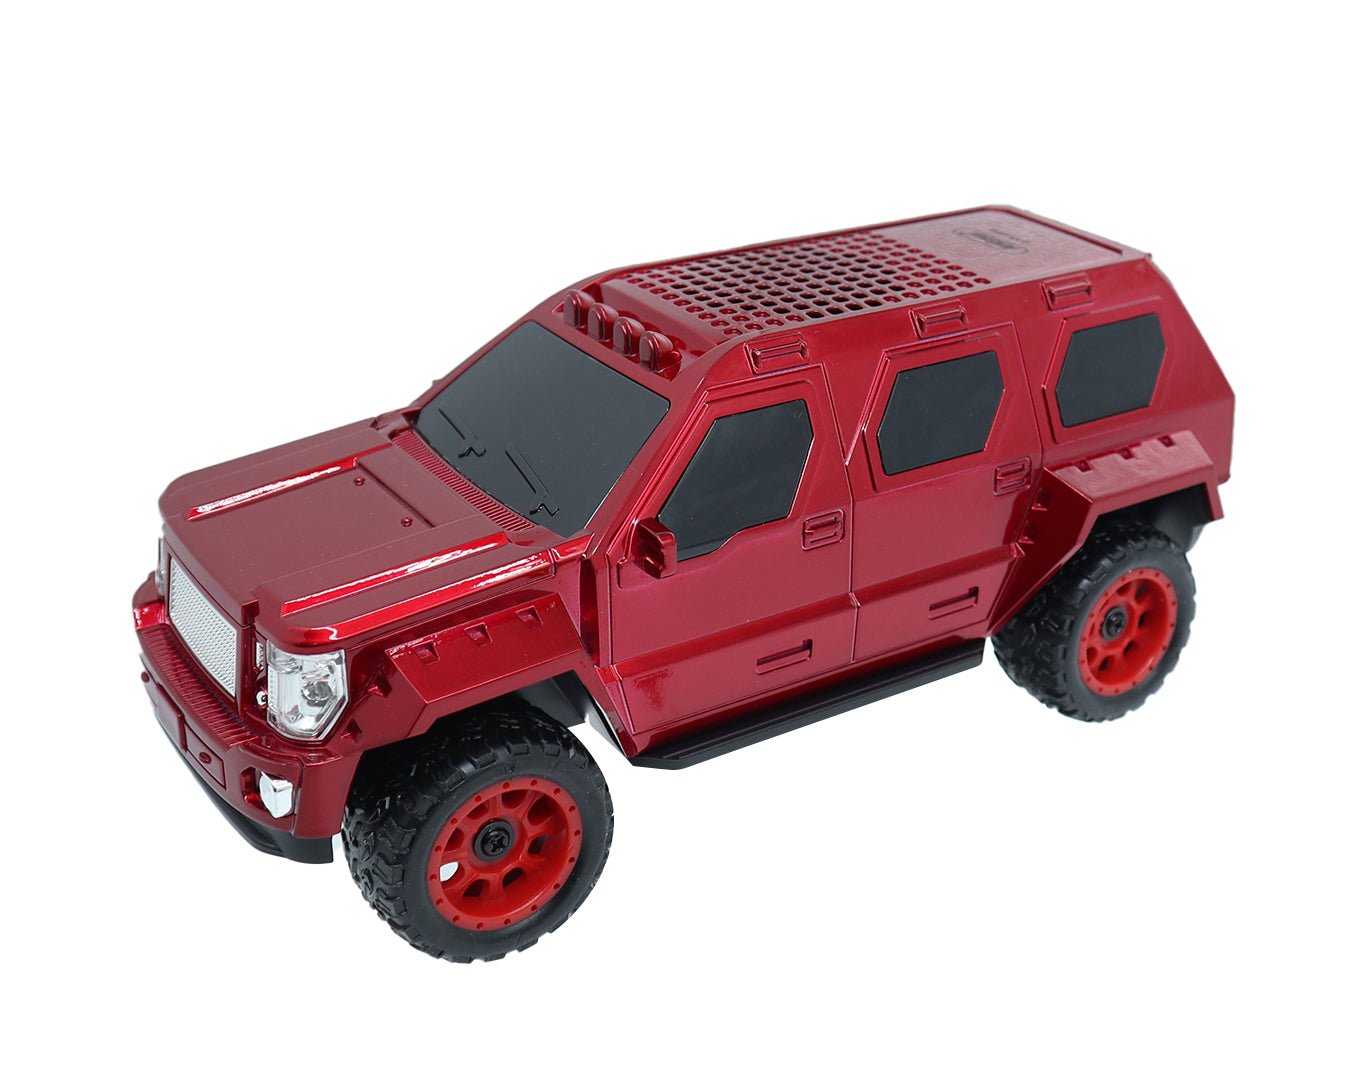 Andowl Portable Wireless Bluetooth Speaker Truck Built-In Battery Q-YX1869 Red